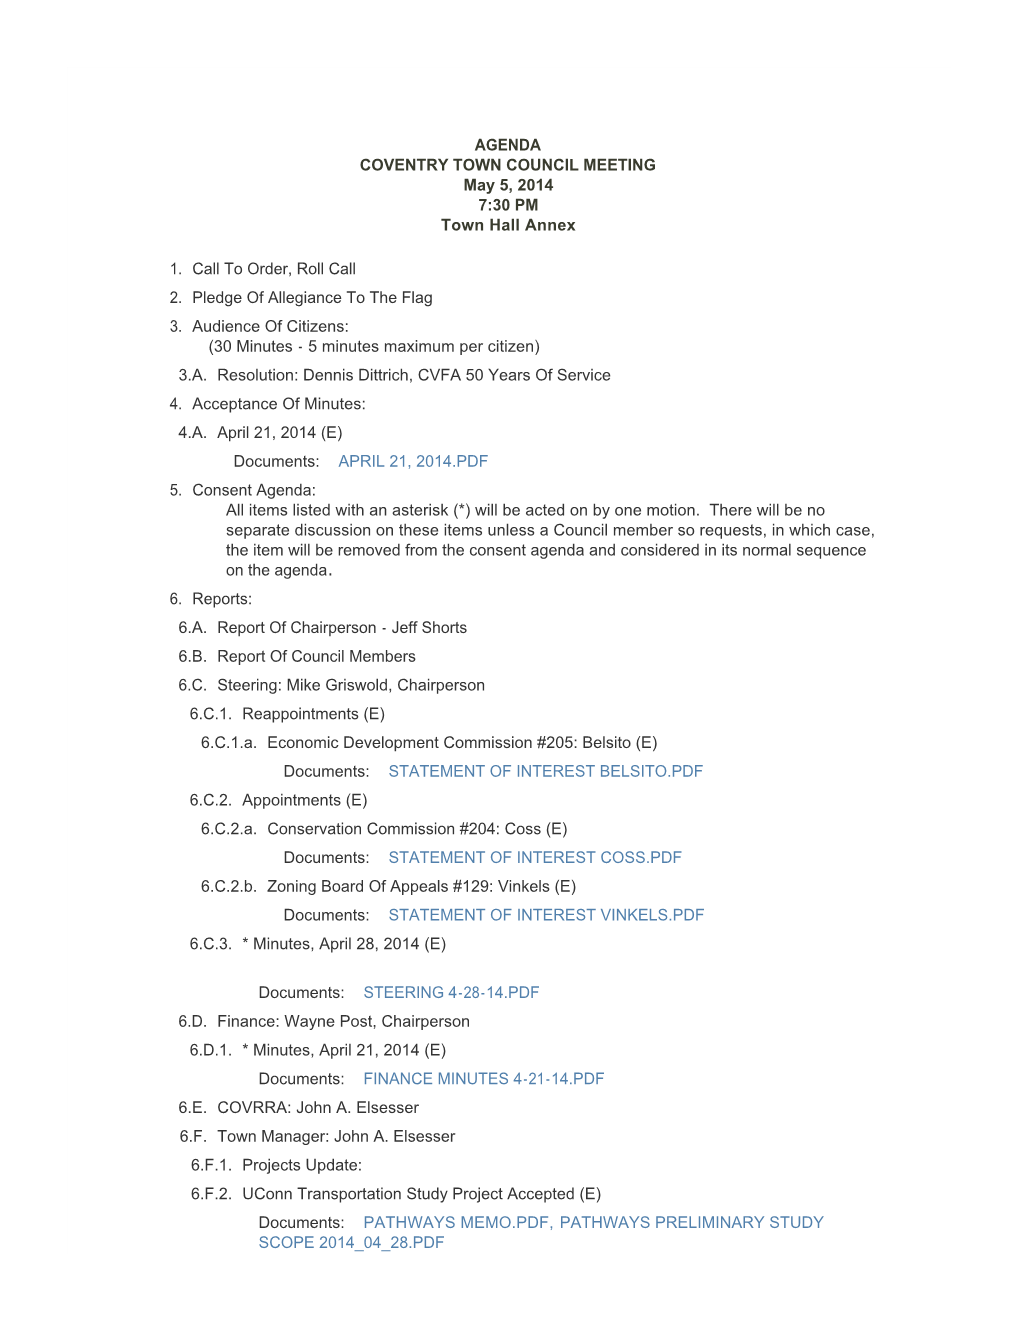 AGENDA COVENTRY TOWN COUNCIL MEETING May 5, 2014 7:30 PM Town Hall Annex